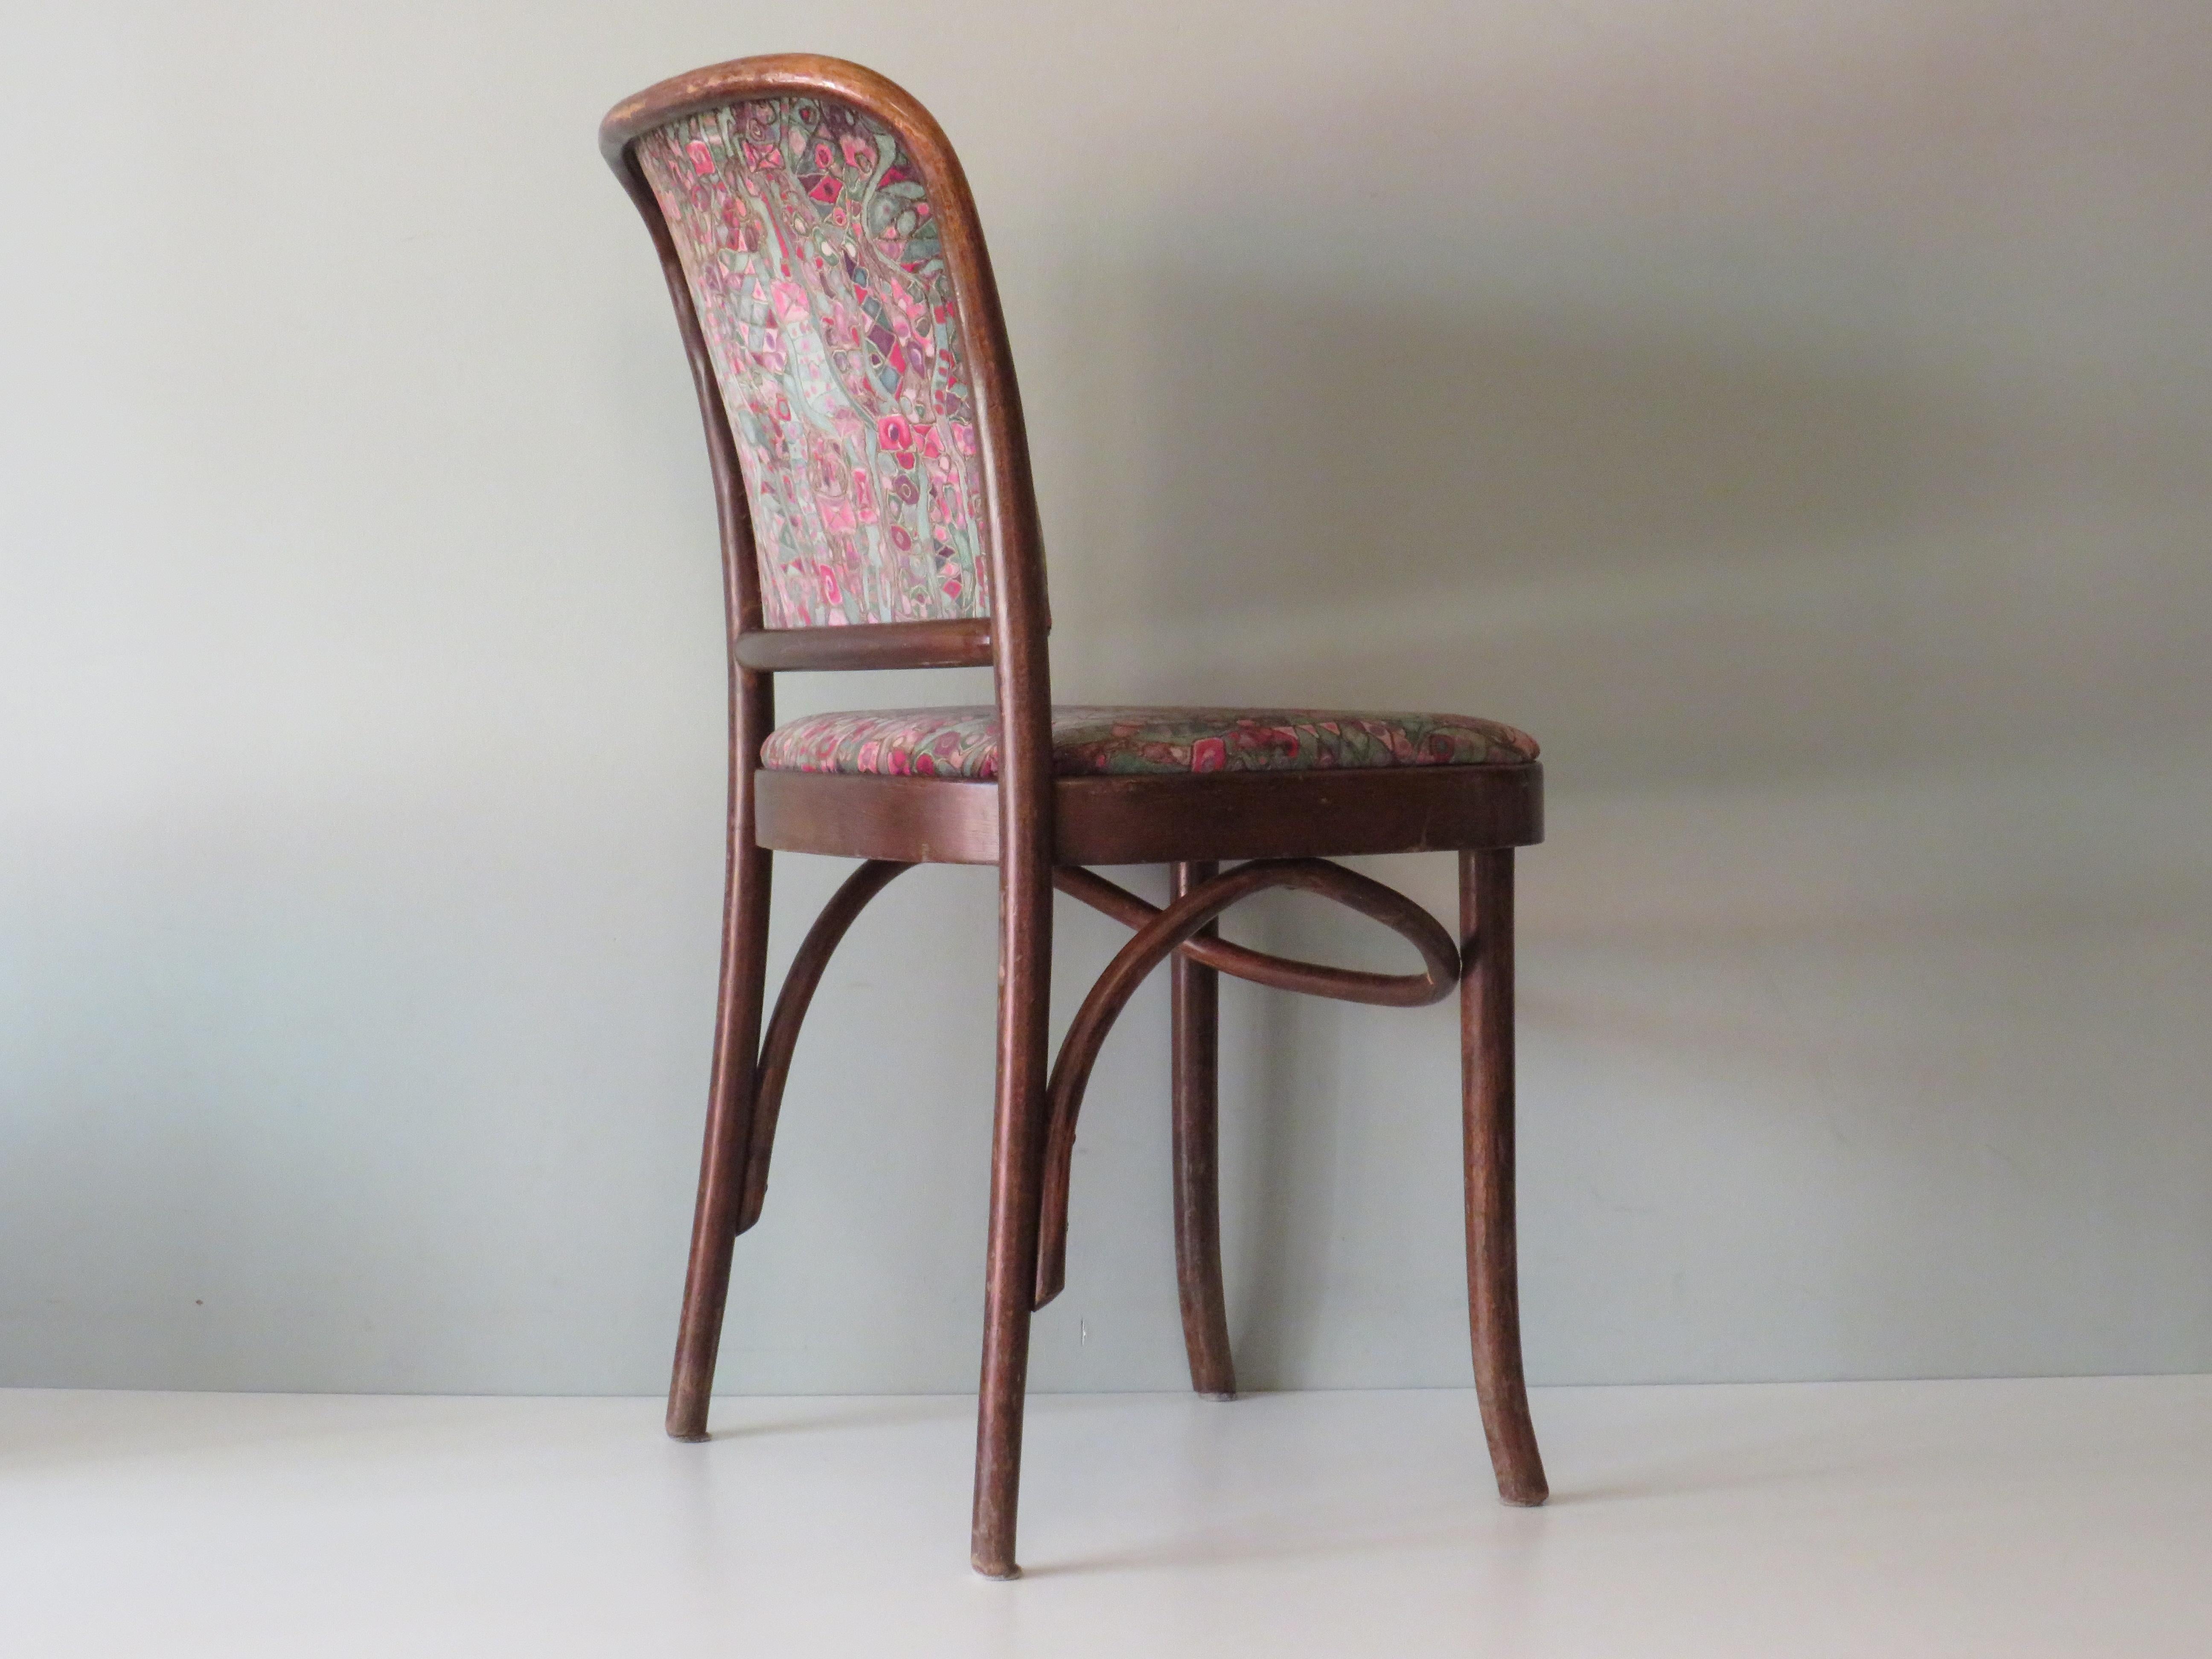 4 Thonet Chairs, Model Prague No. 811, First Half of the 20th Century For Sale 5